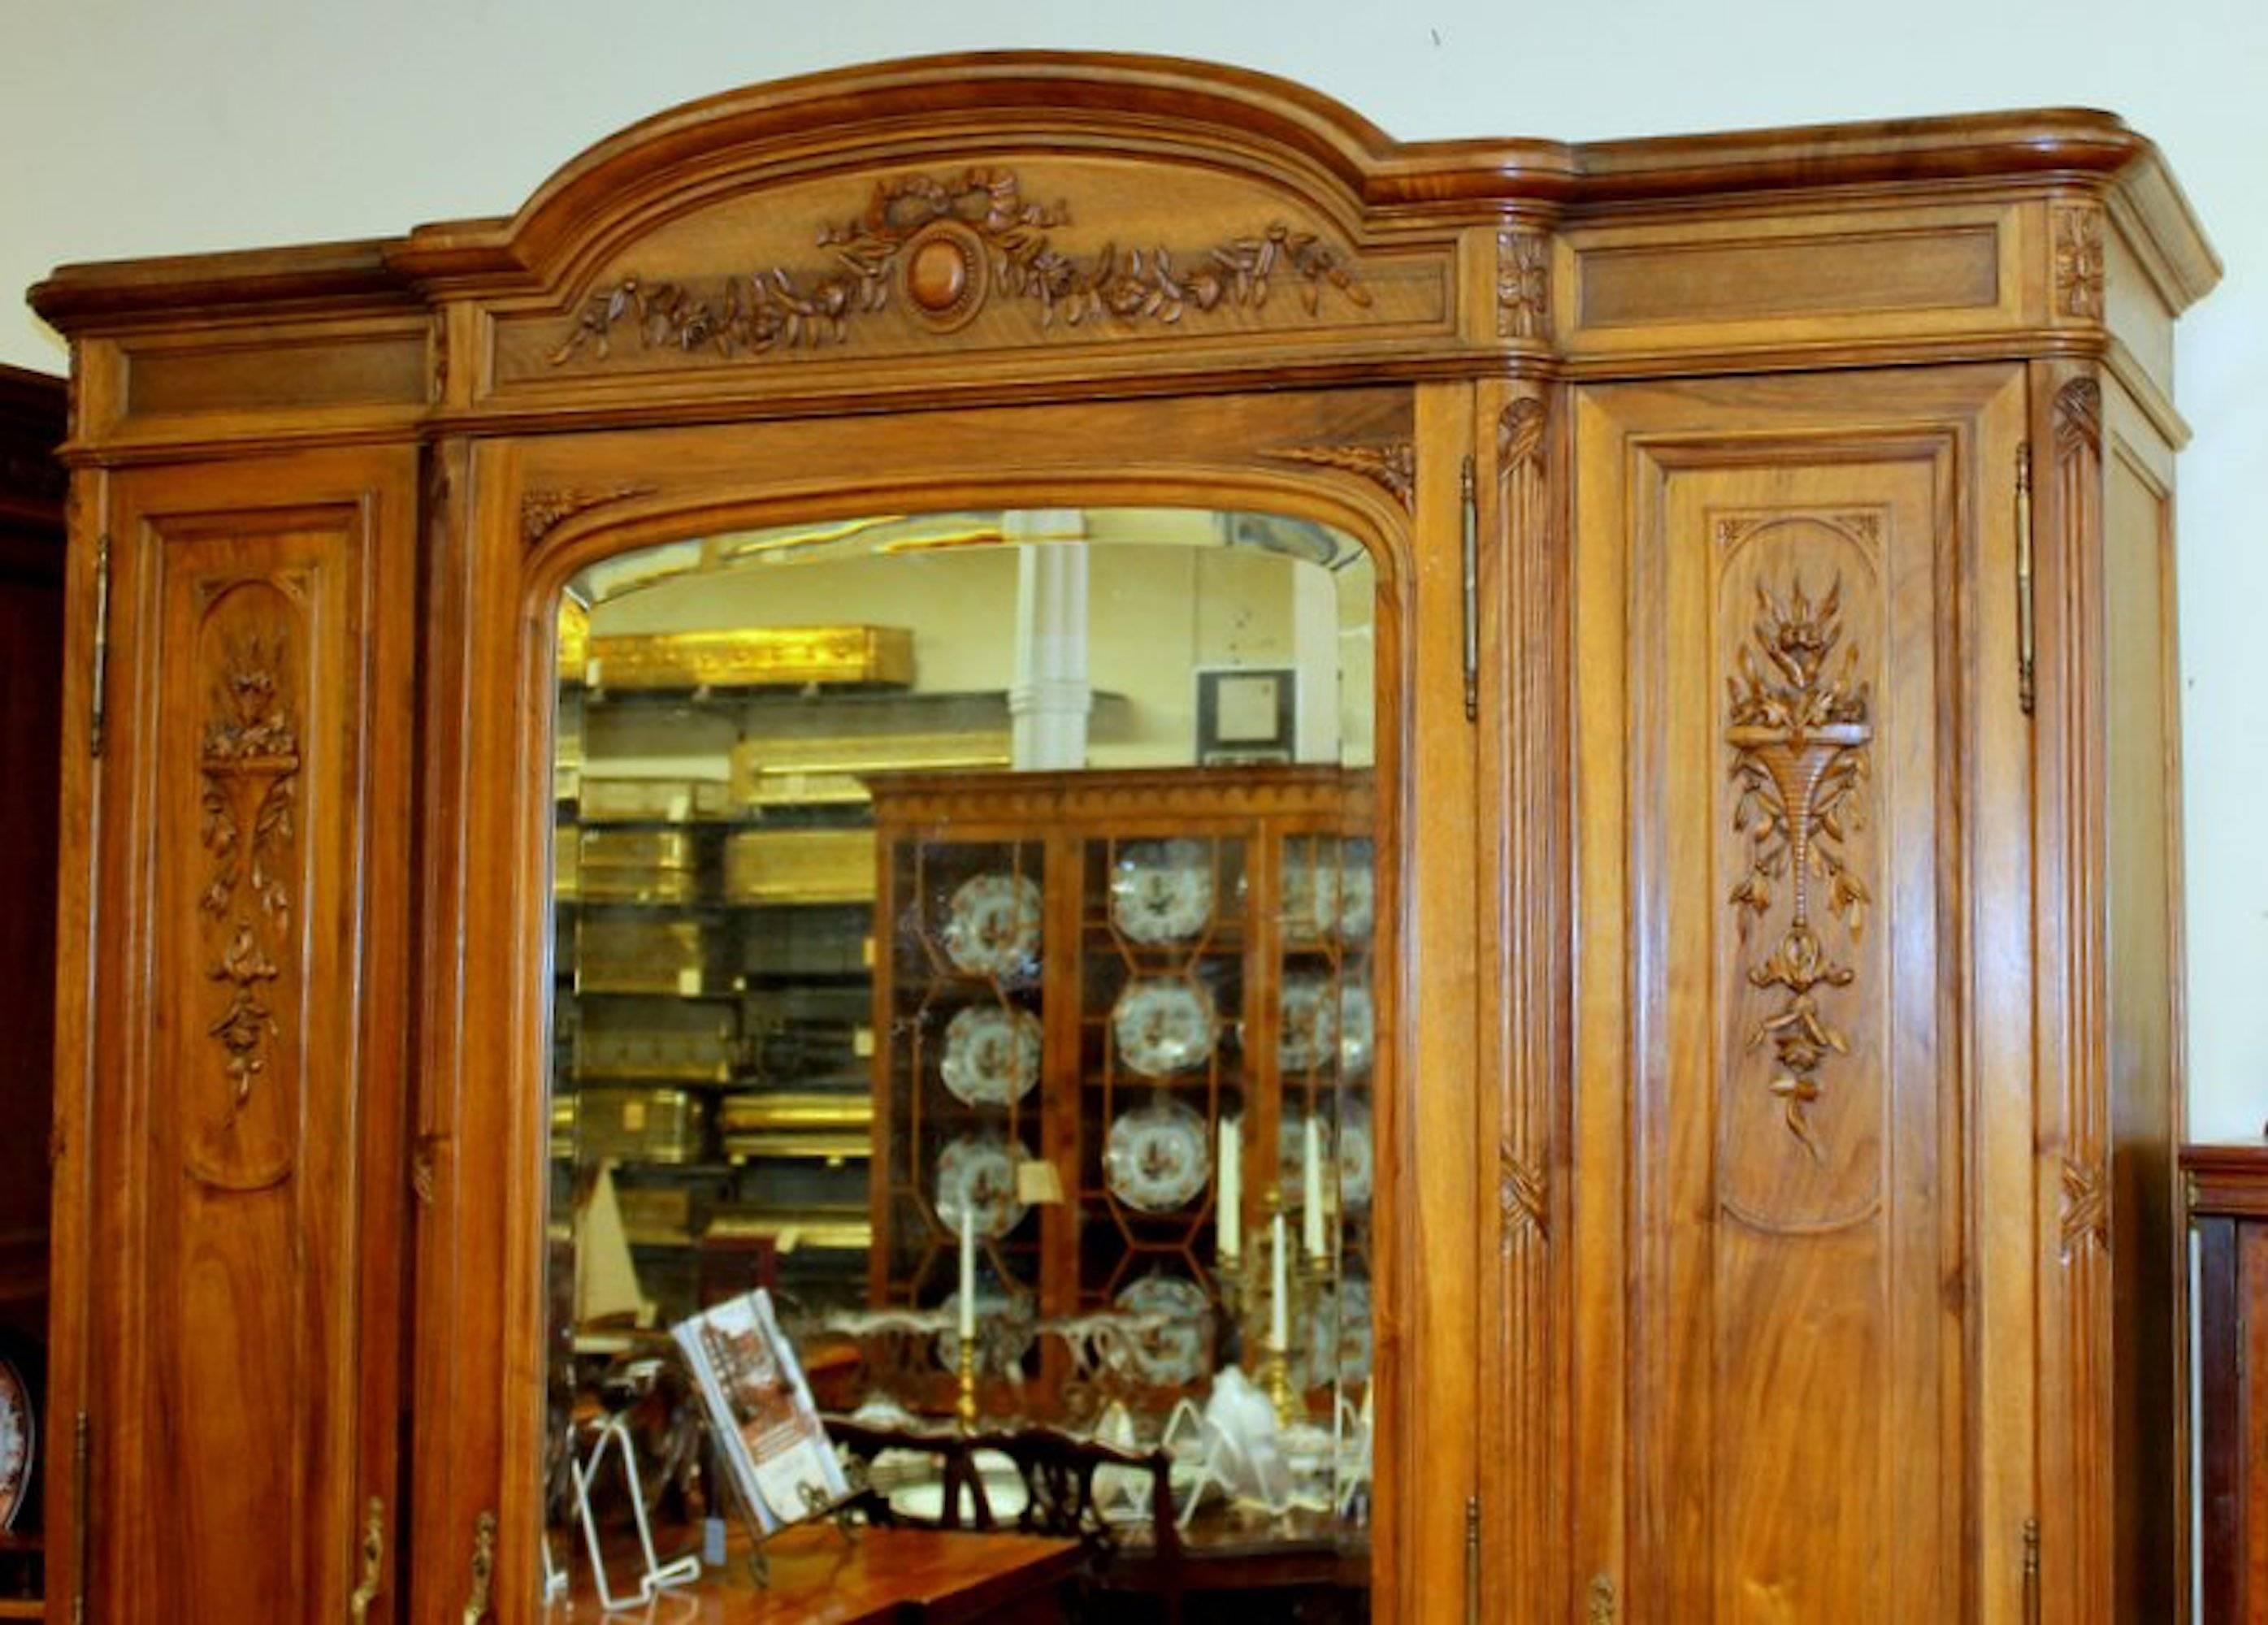 Fabulous quality Old French hand-carved walnut compactum wardrobe with original mirrored doors and hardware. Amazing amount of space.